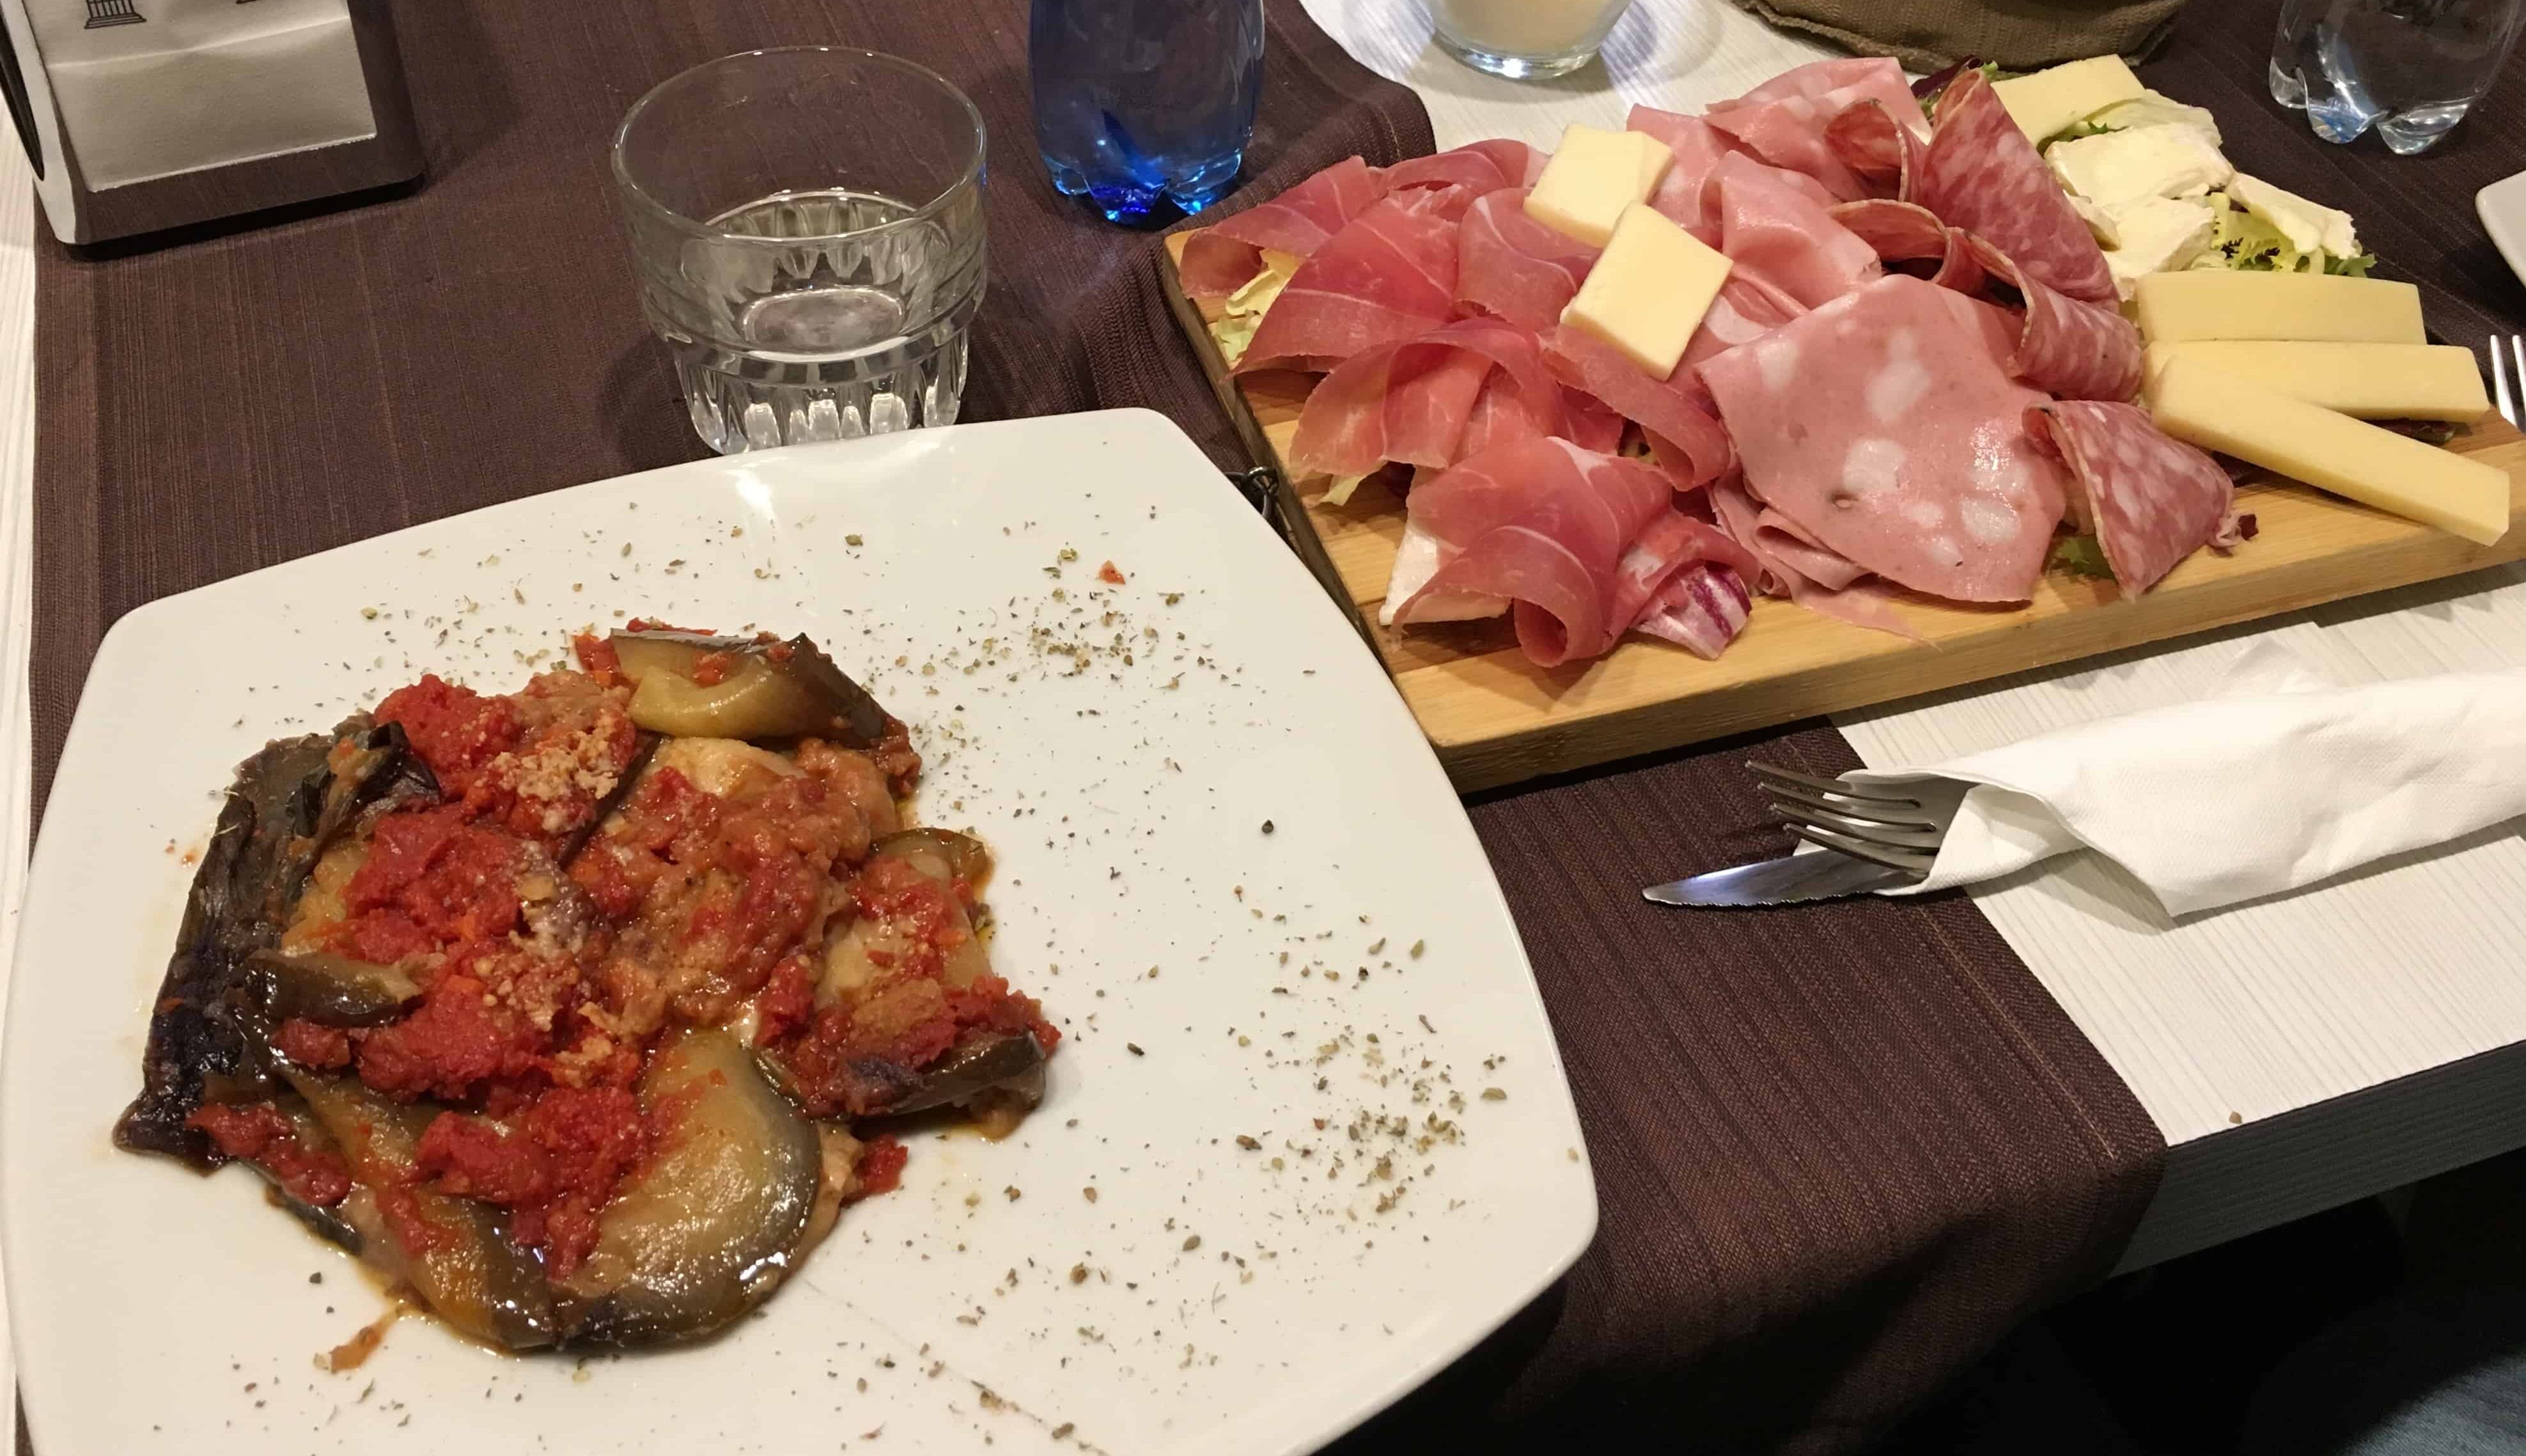 Eggplant parmigiana and meat and cheese board at Accademia Caffè